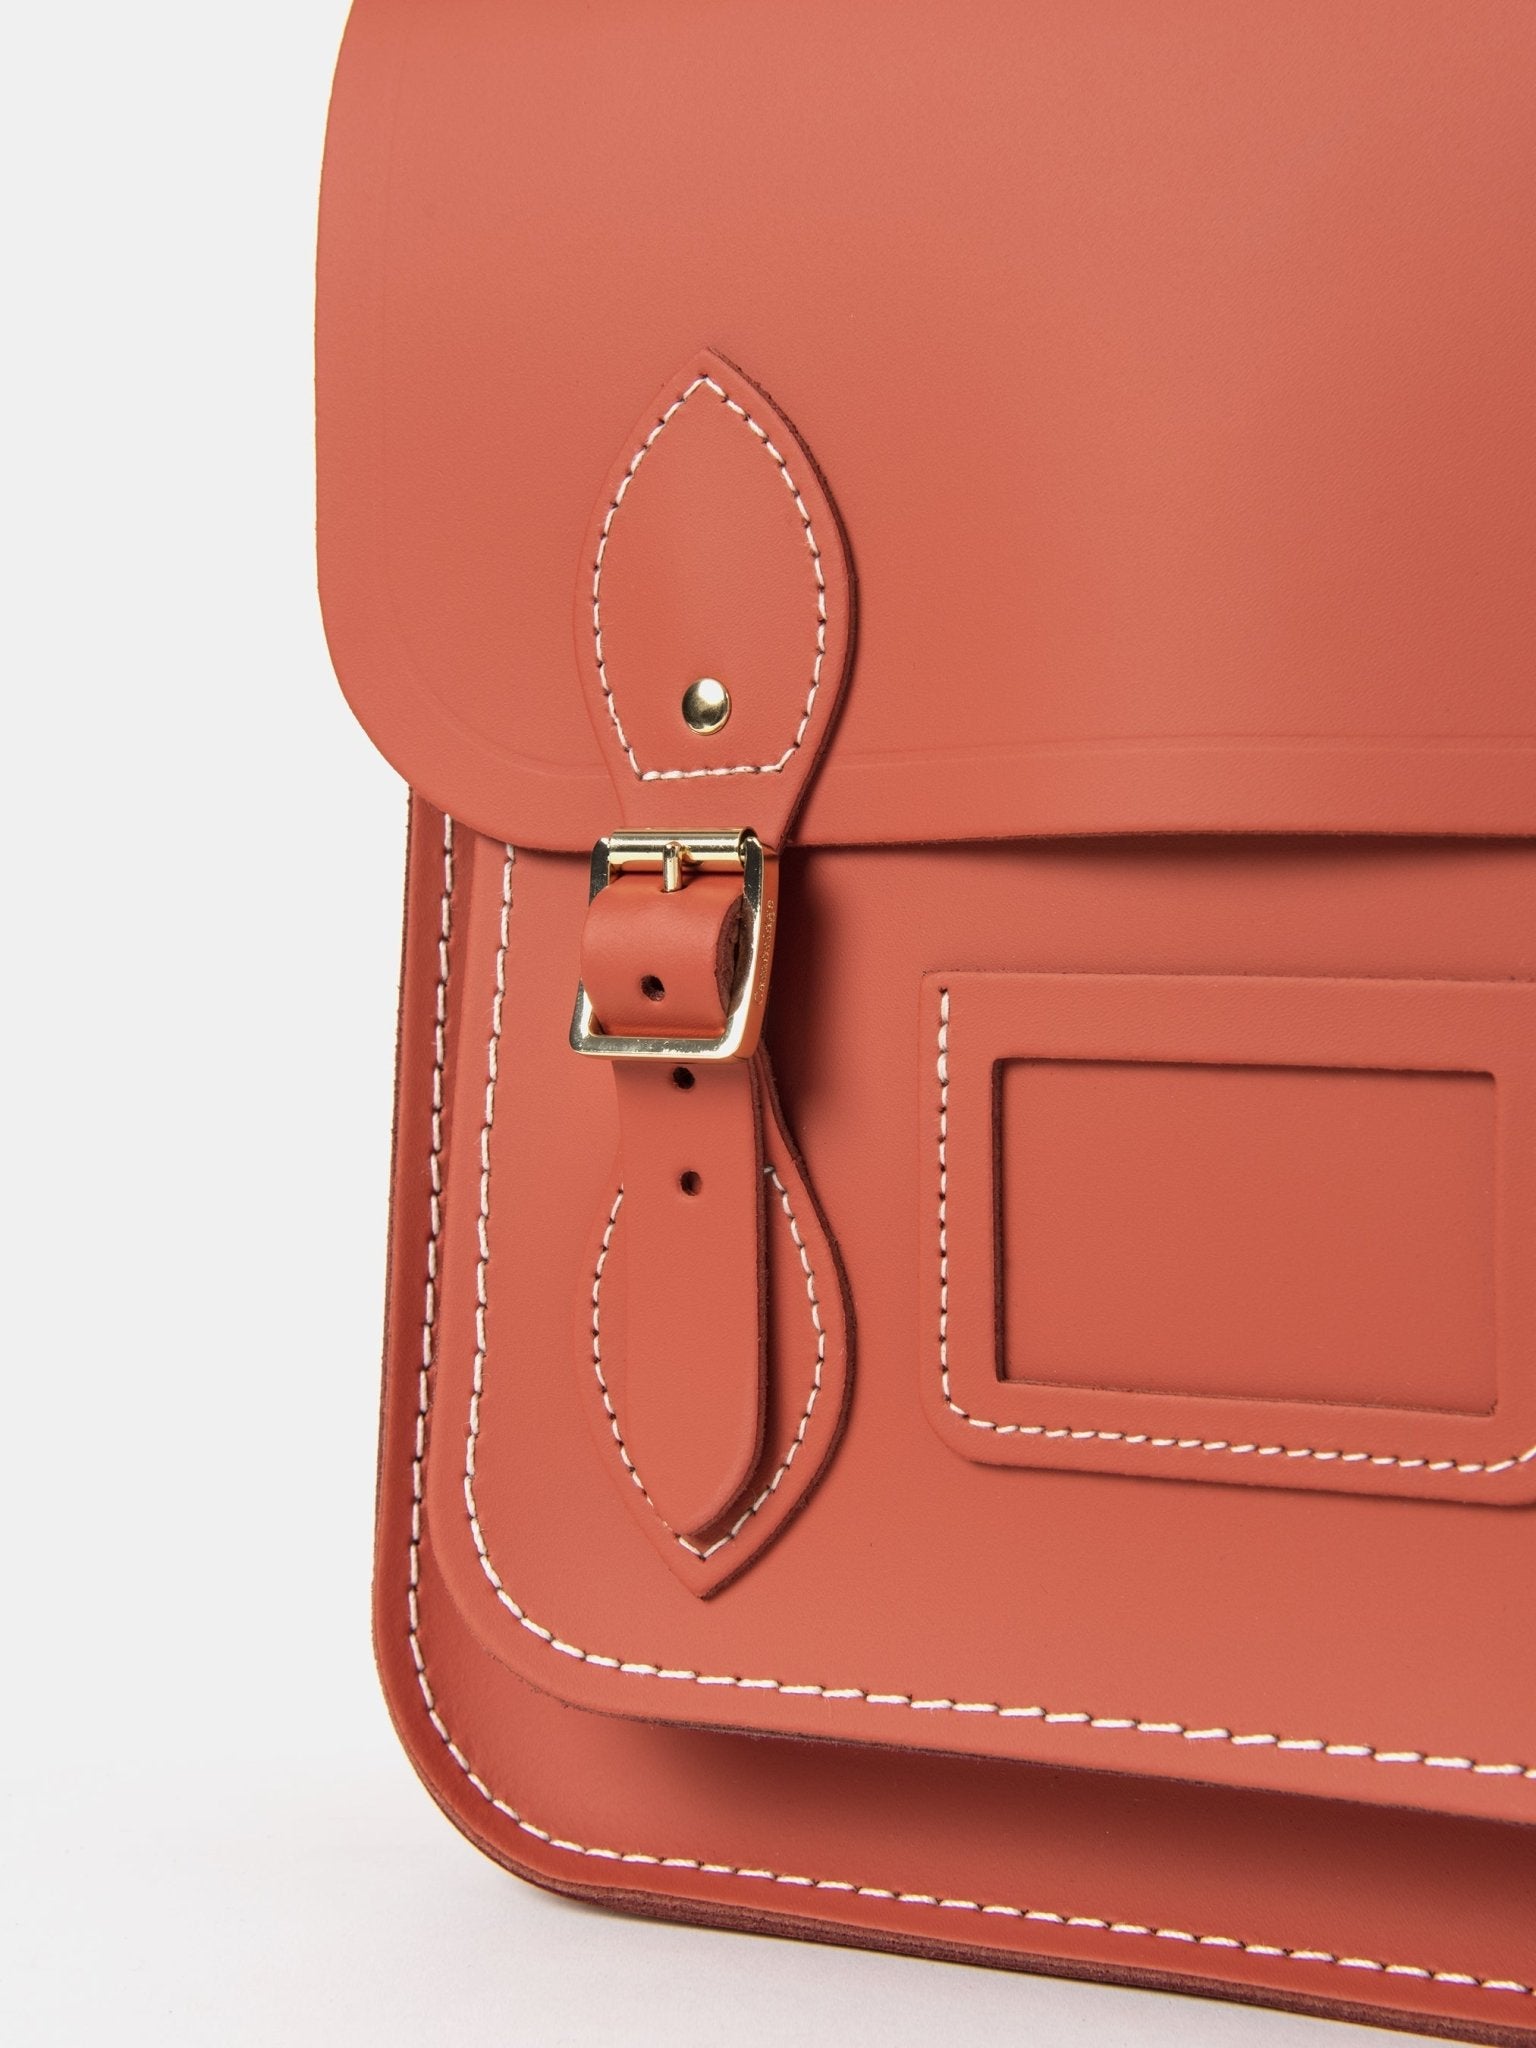 The Small Portrait Backpack - Burning Ember Matte with Contrast Stitch - The Cambridge Satchel Company EU Store